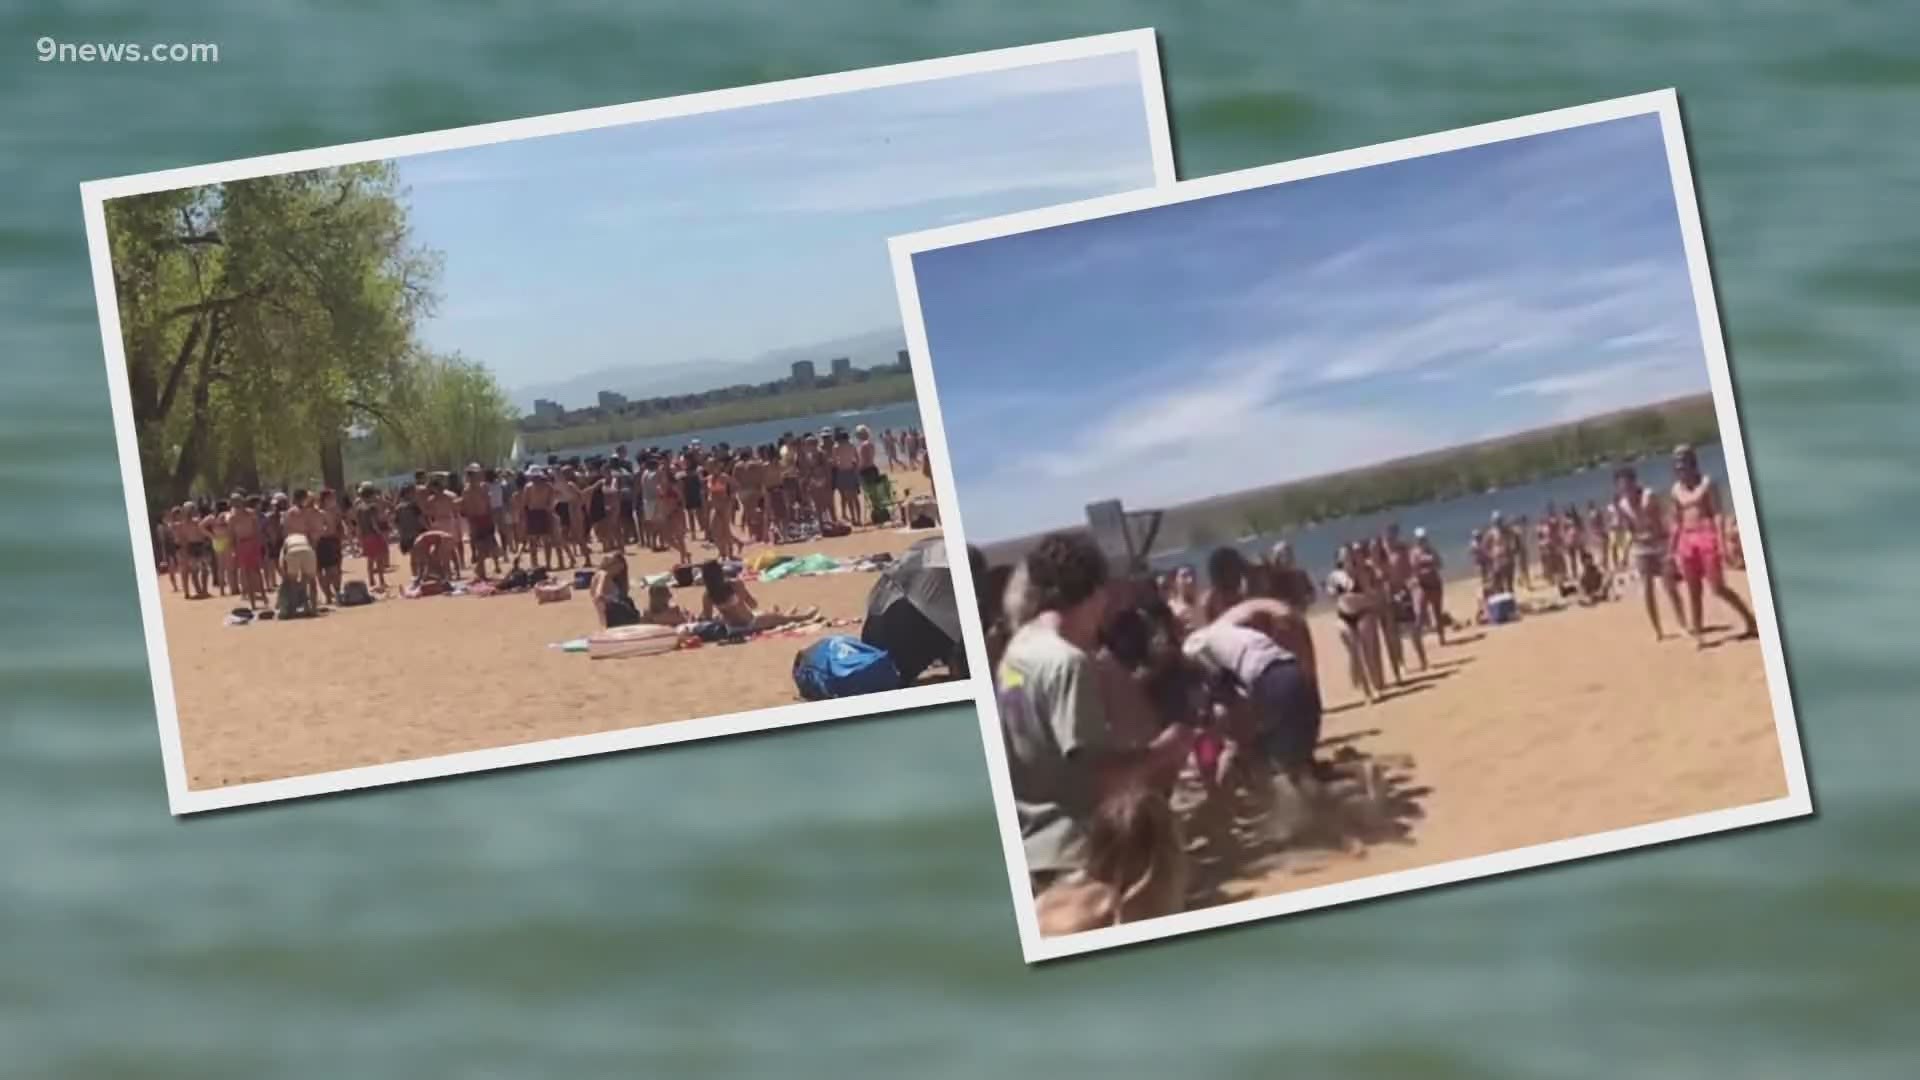 Colorado Parks & Wildlife can't say how many people crowded the swim beach at Cherry Creek State Park on Monday, but they do say it was packed.